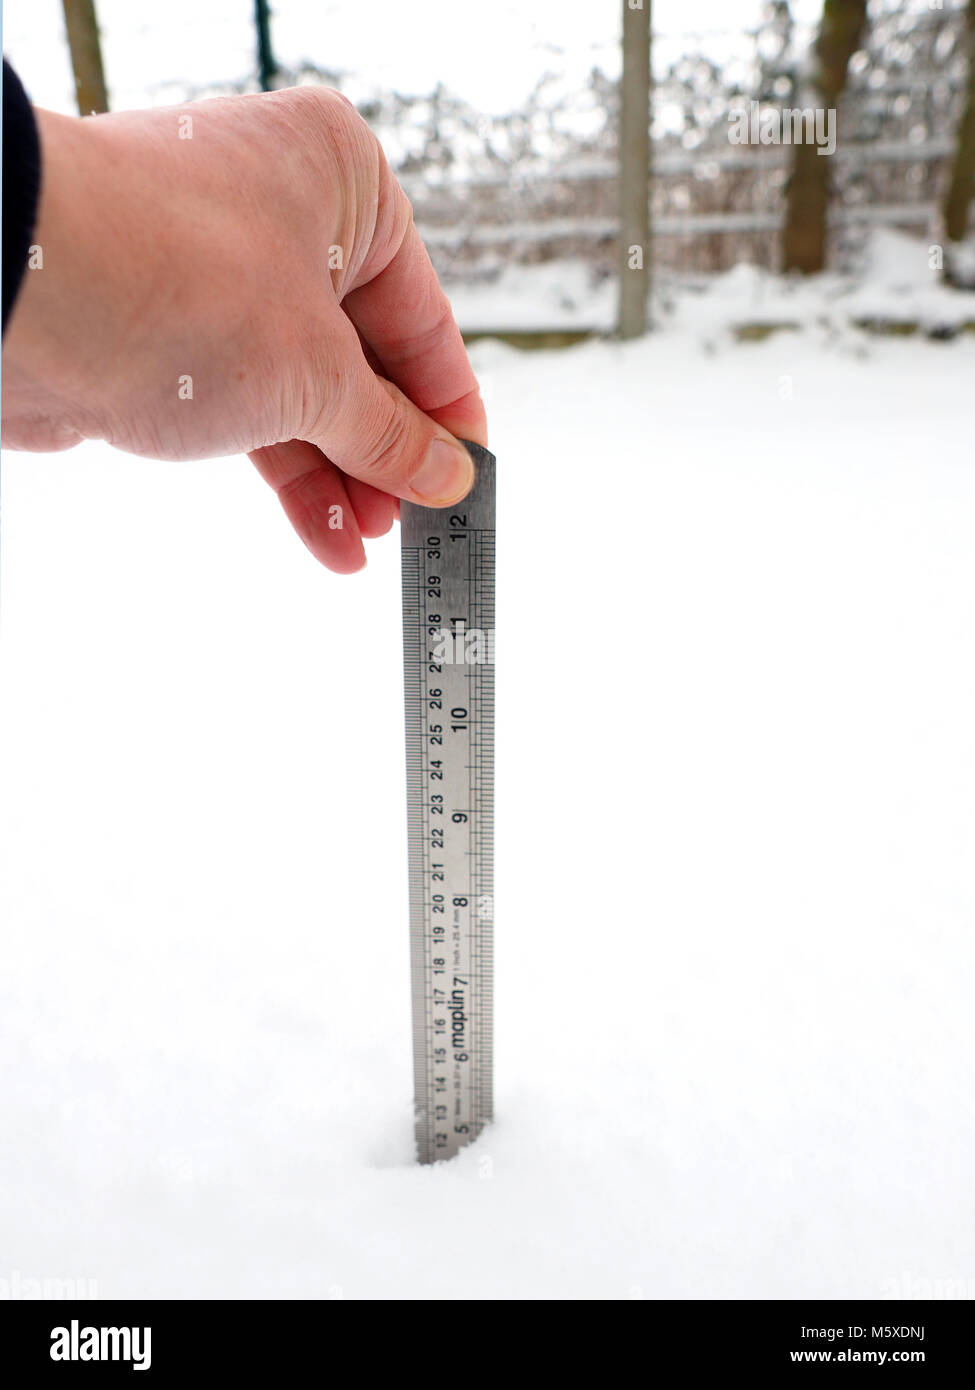 Sheerness, Kent, UK. 27th Feb, 2018. UK Weather: as the ruler shows 5 inches  or 12.5cm of snow has fallen overnight, as measured at 10am, in the back  garden of a house